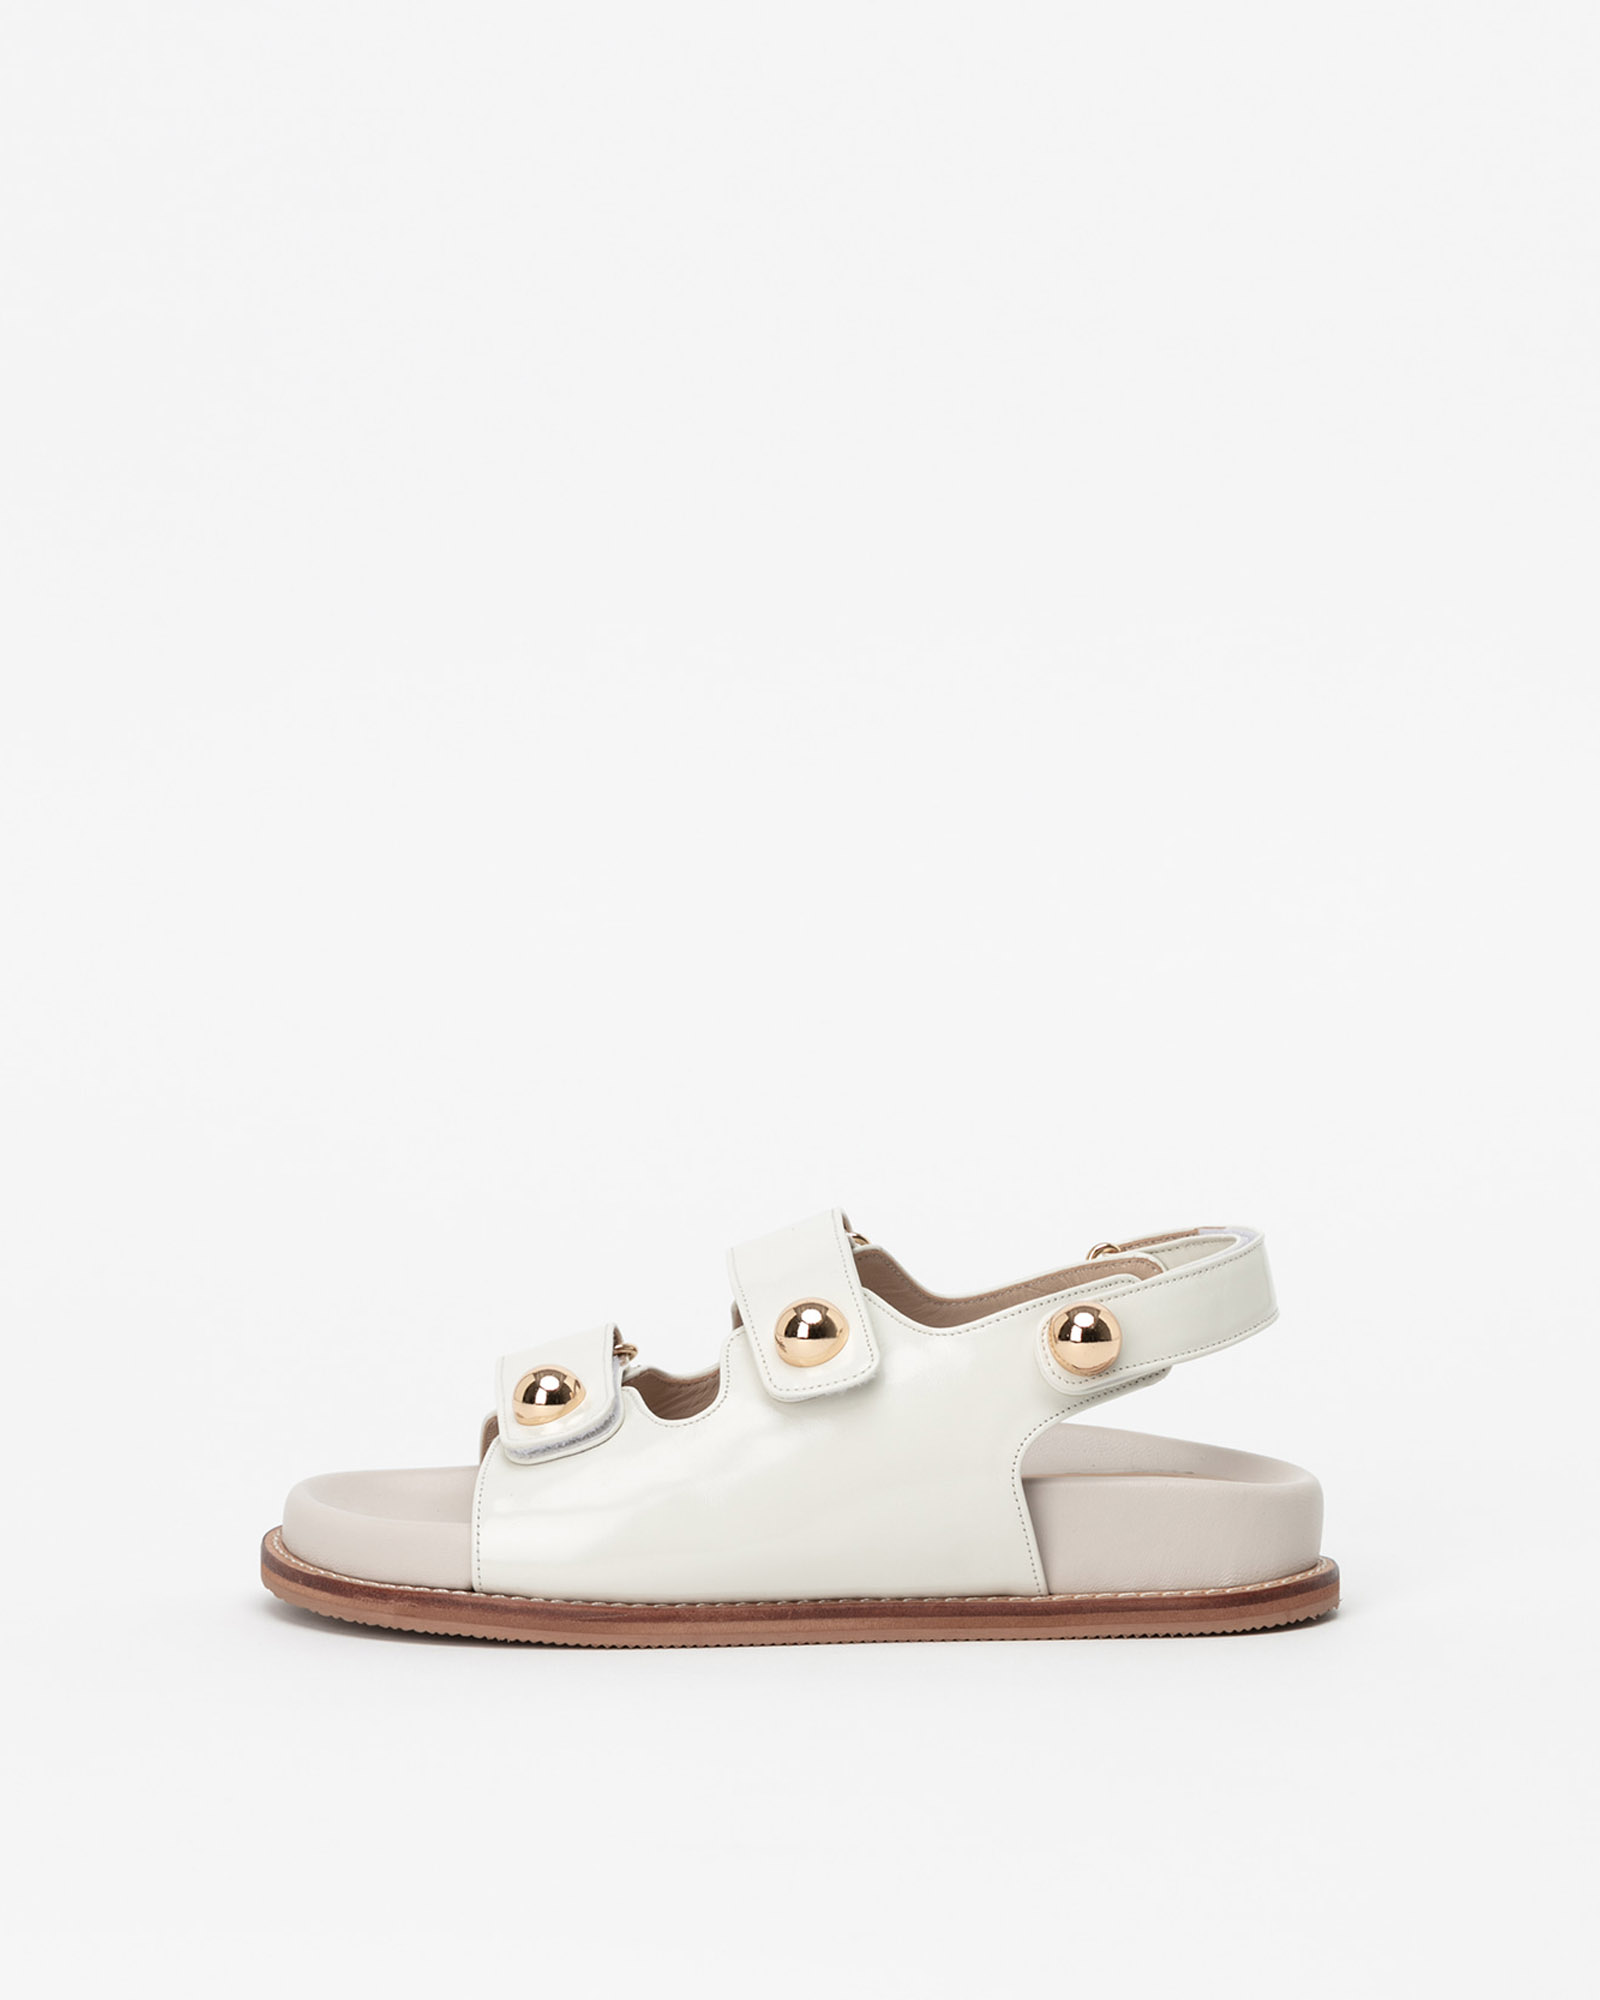 Galatea Footbed Sandals in Textured Ivory